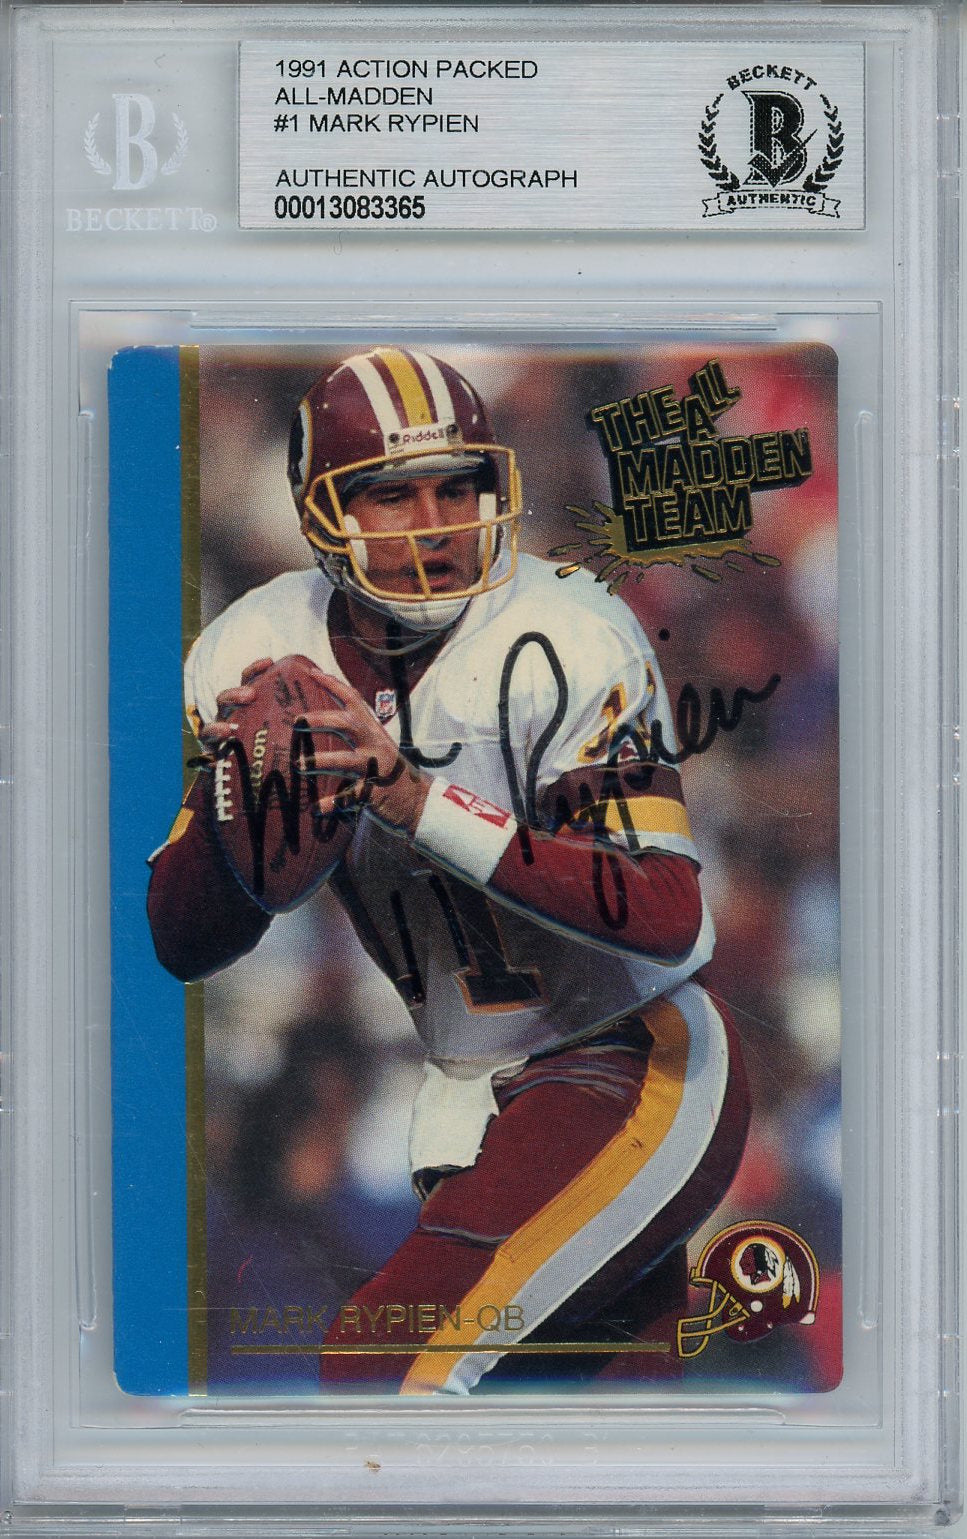 1991 ACTION PACKED ALL MADDEN MARK RYPIEN CARD BAS BECKETT AUTO